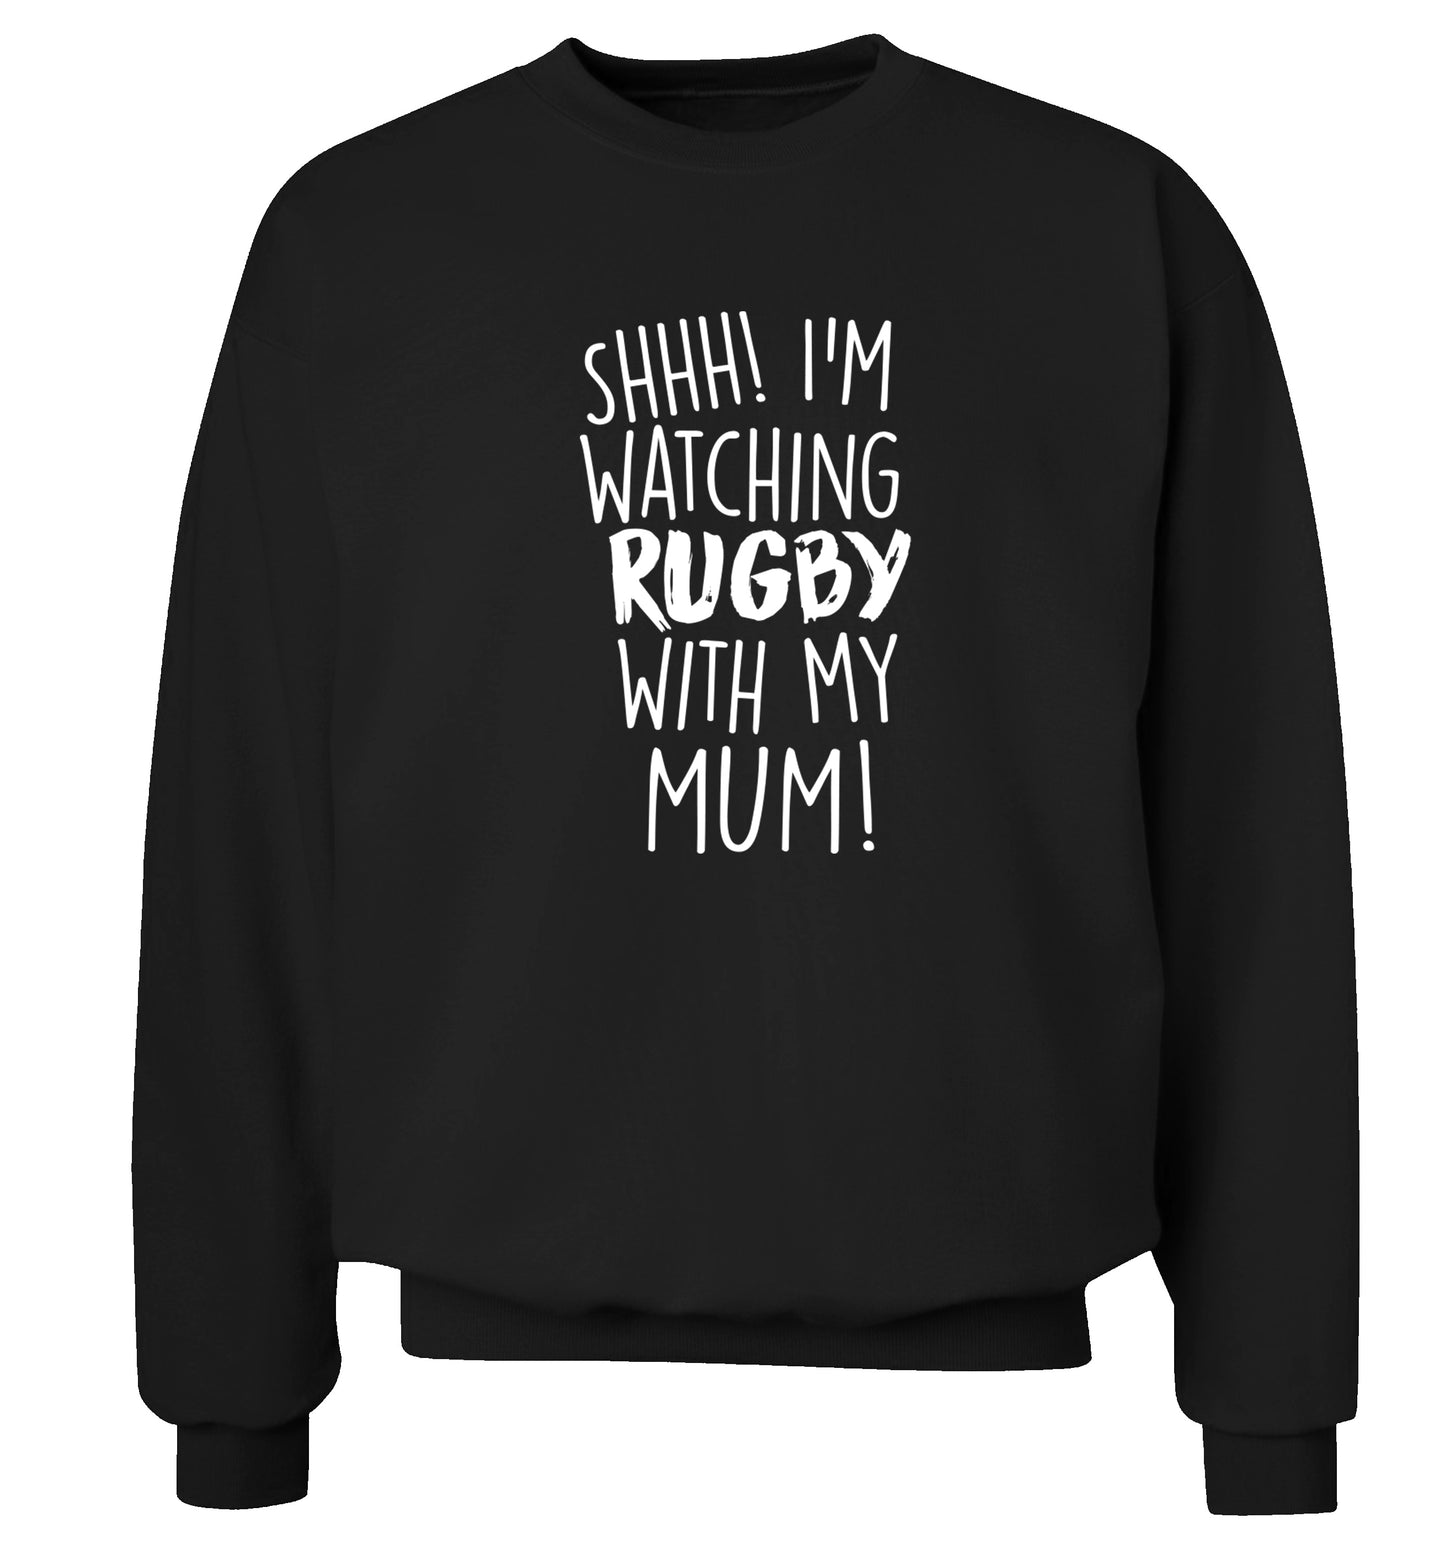 Shh... I'm watching rugby with my mum Adult's unisex black Sweater 2XL